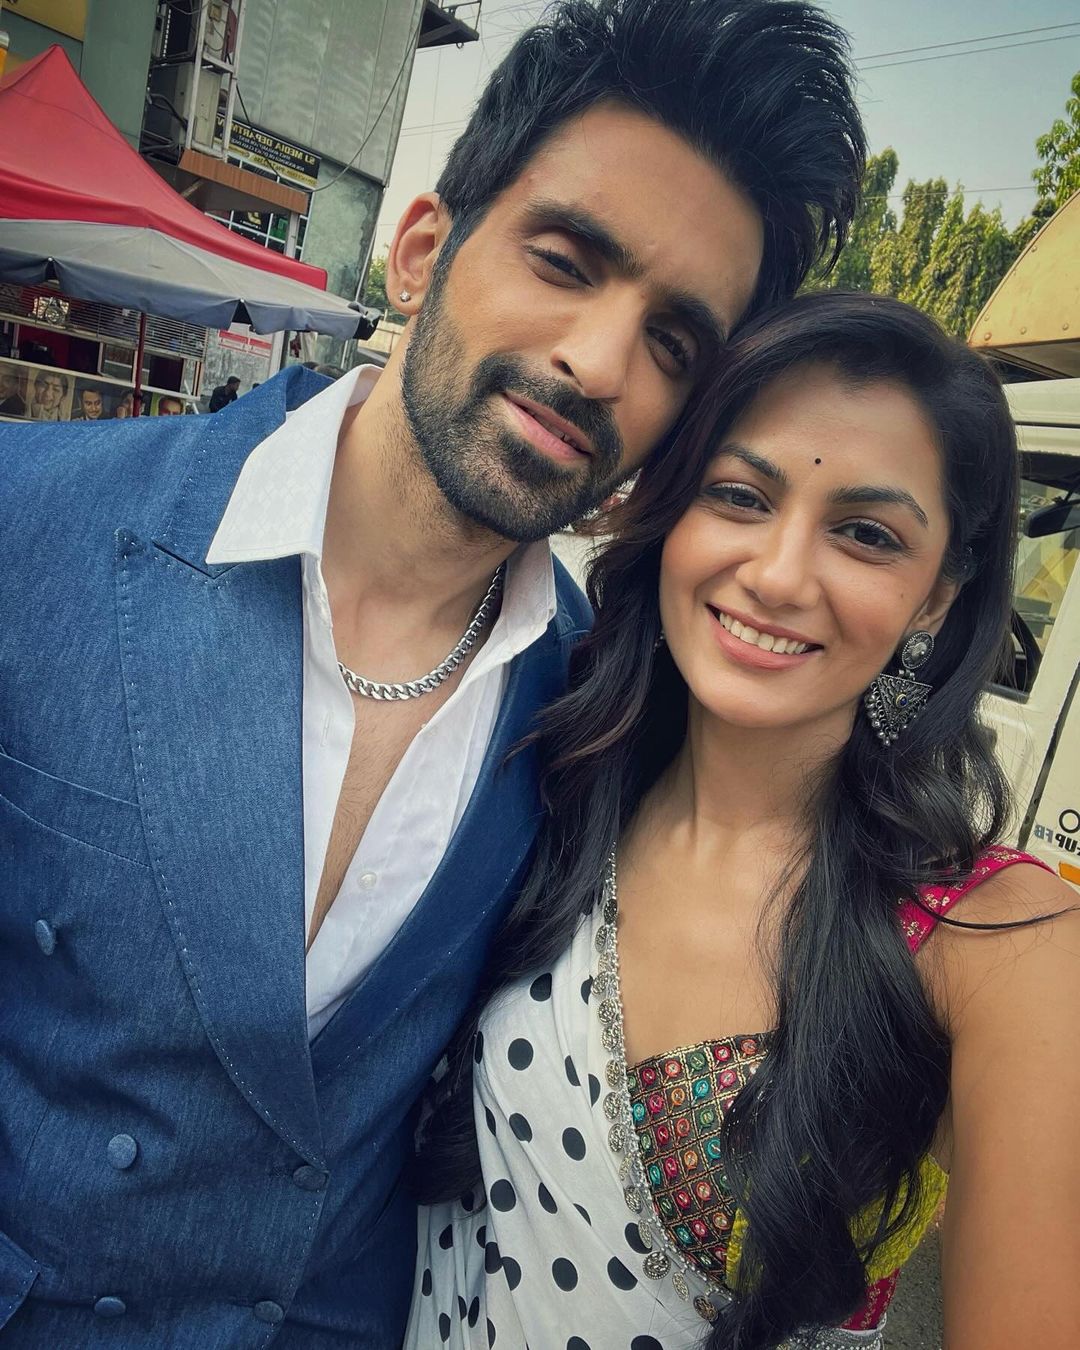 Kaise Mujhe Tum Mil Gaye’s Sriti Jha And Arjit Taneja’s Hilarious Video Grabbed Everyone’s Attention. Check Out About It Here!